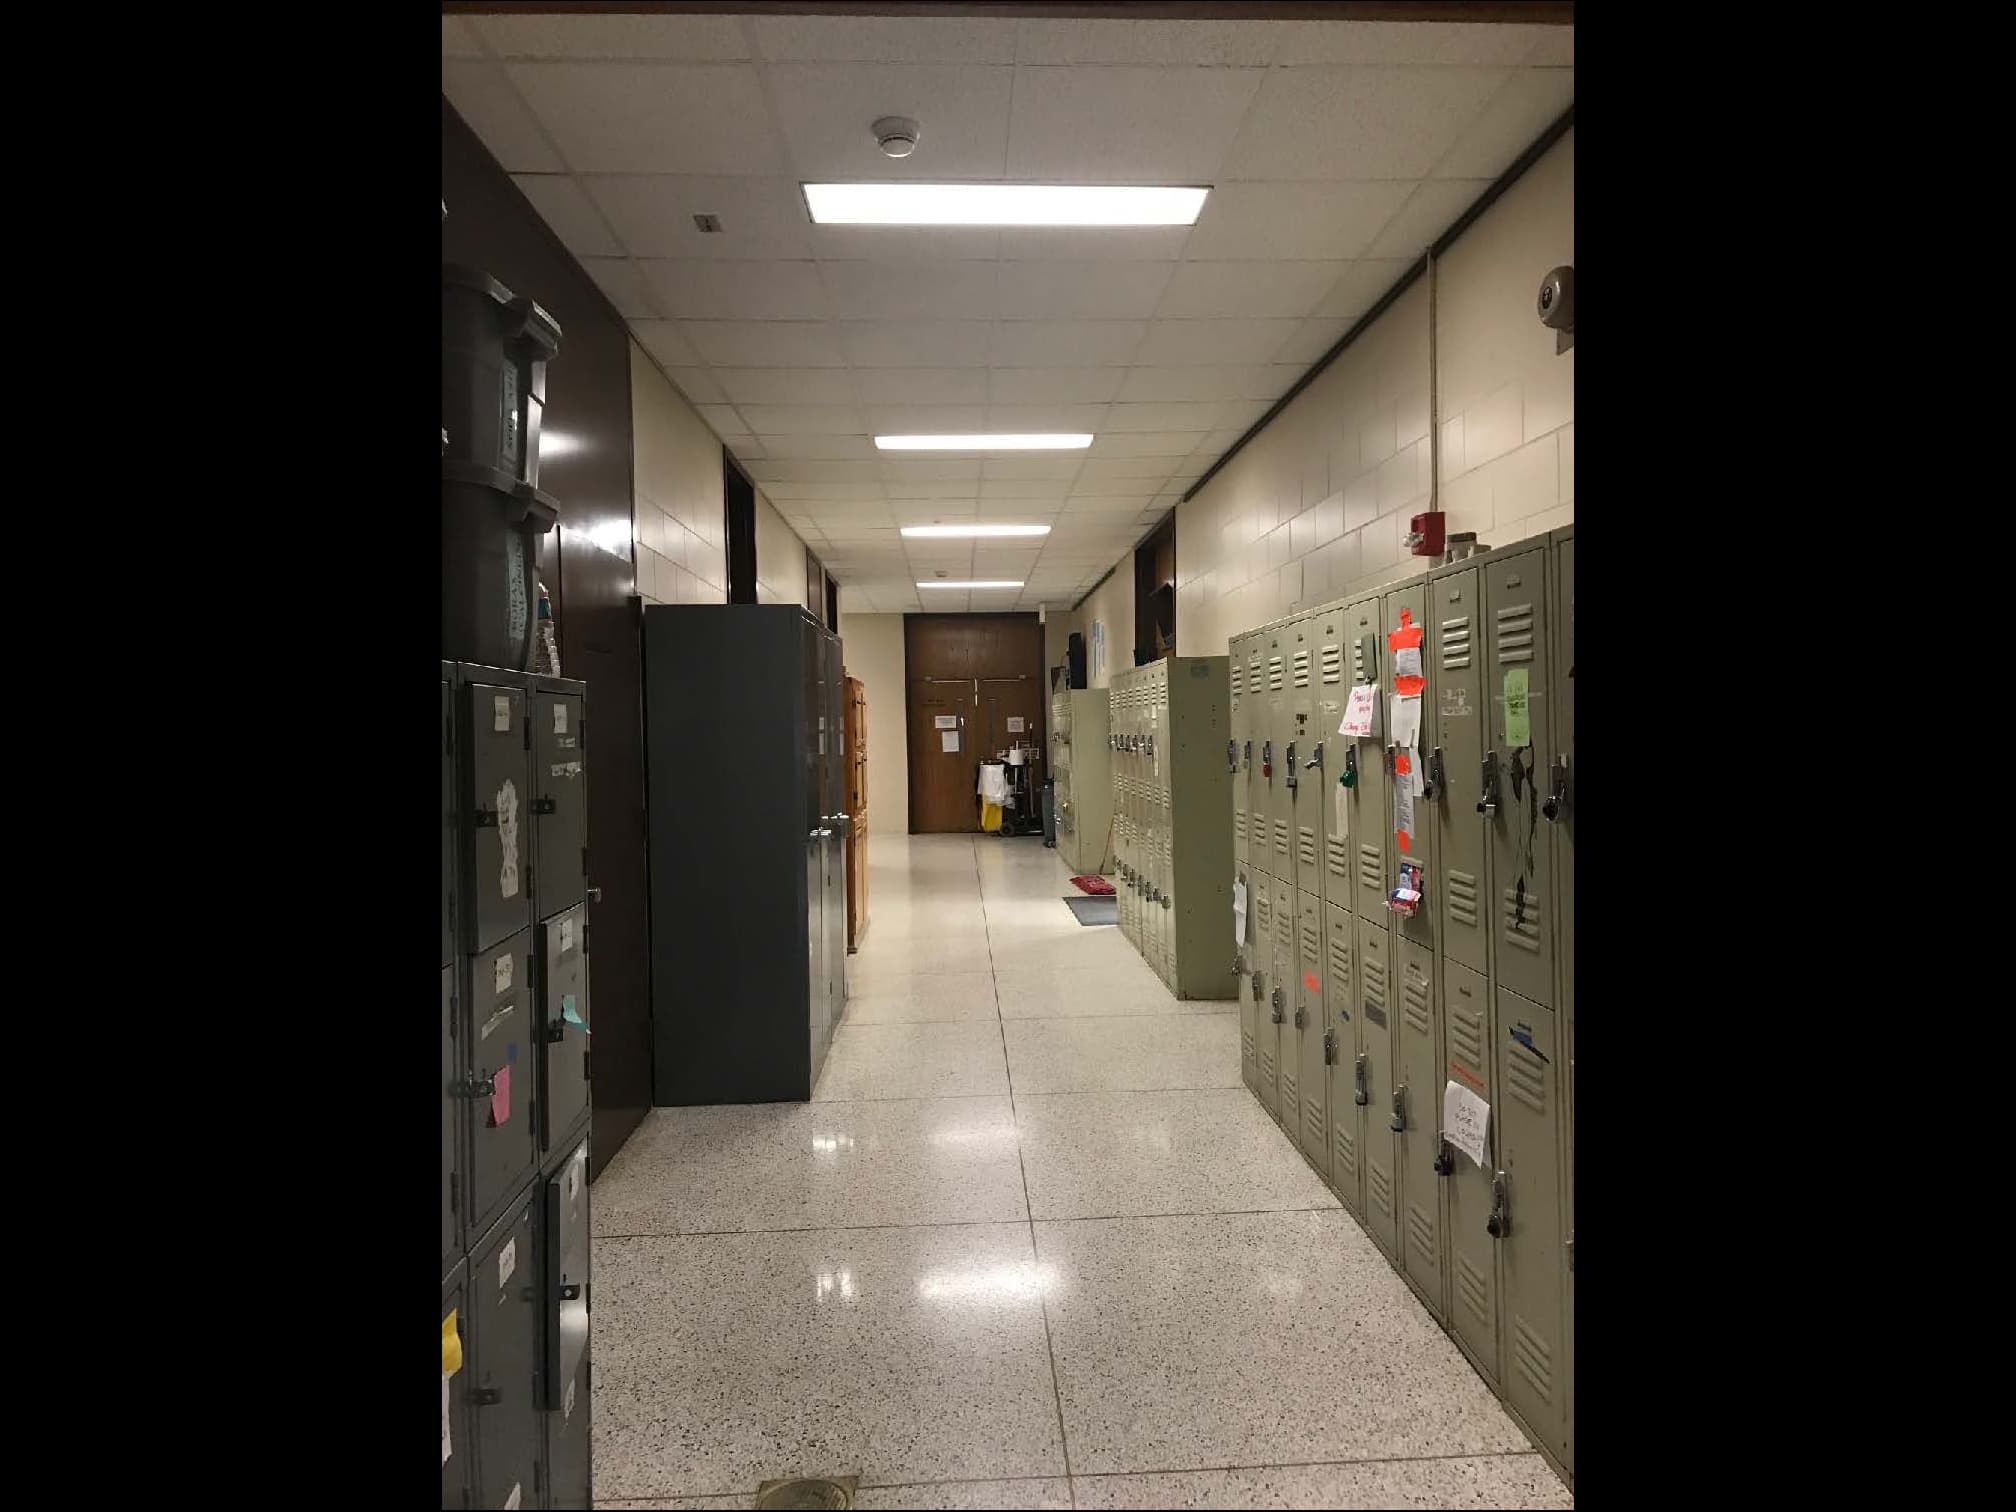 Hallways overloaded with storage and lockers